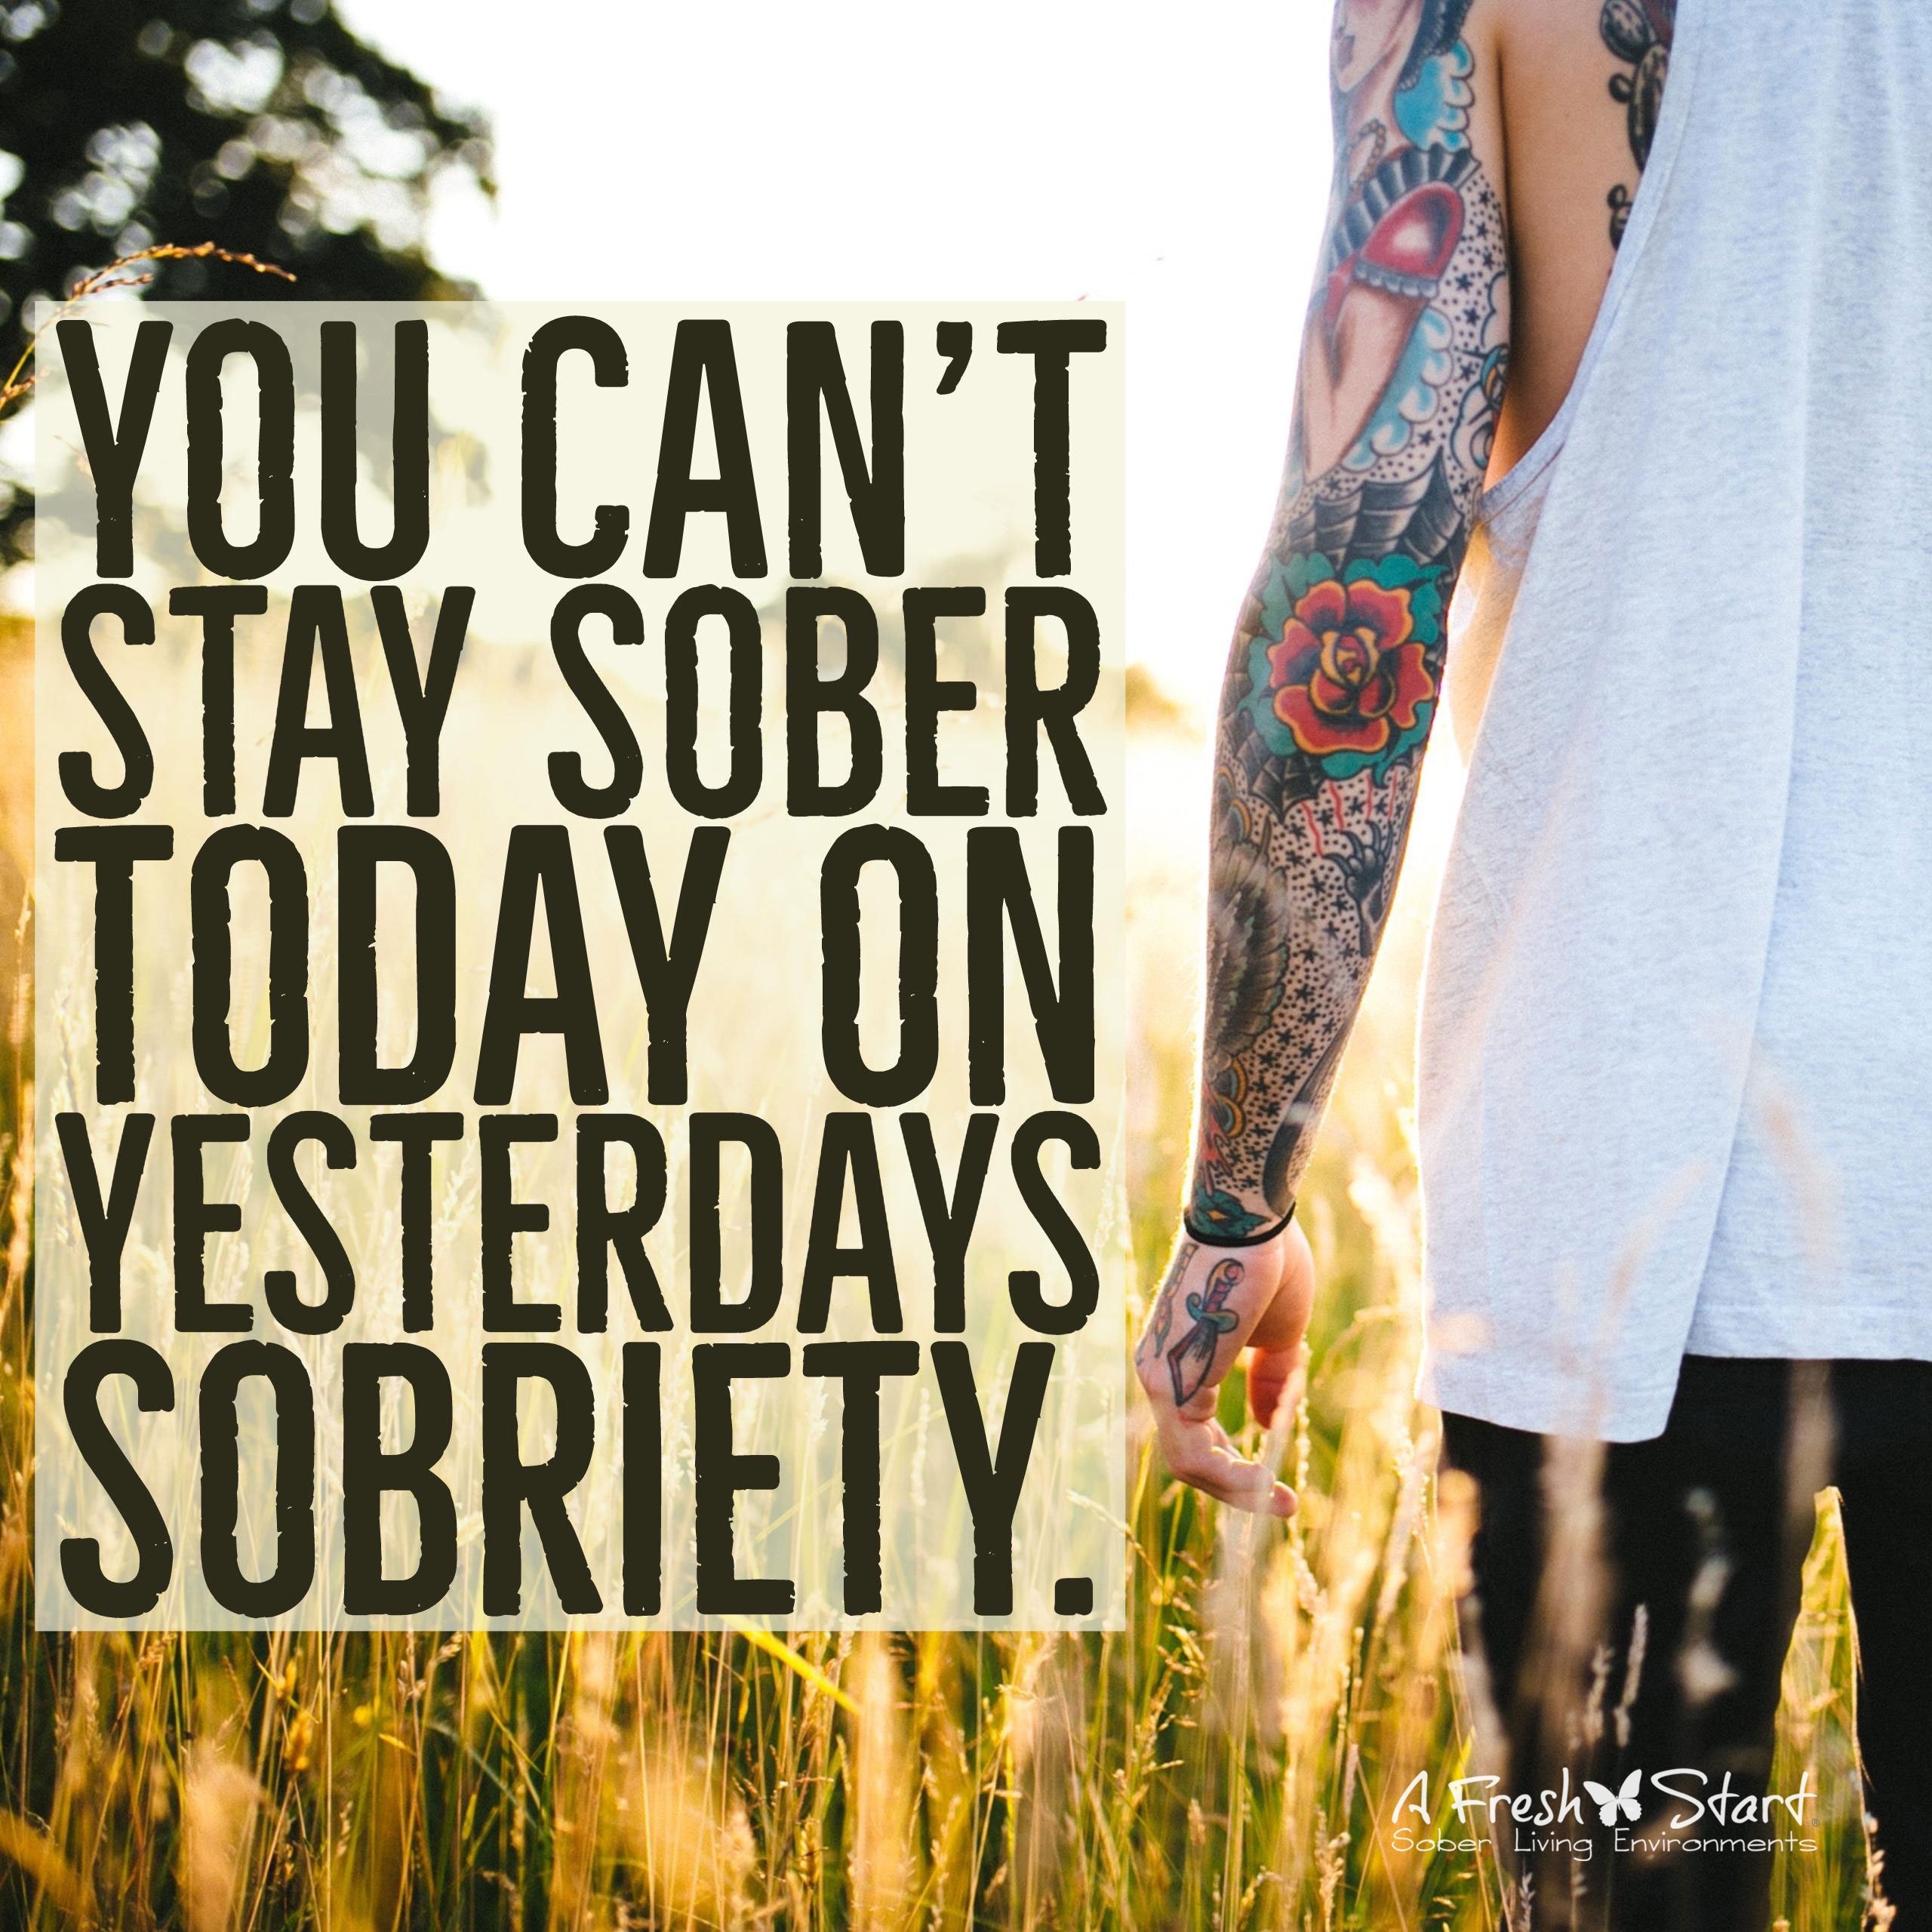 A Fresh Start Sober Quotes Gallery